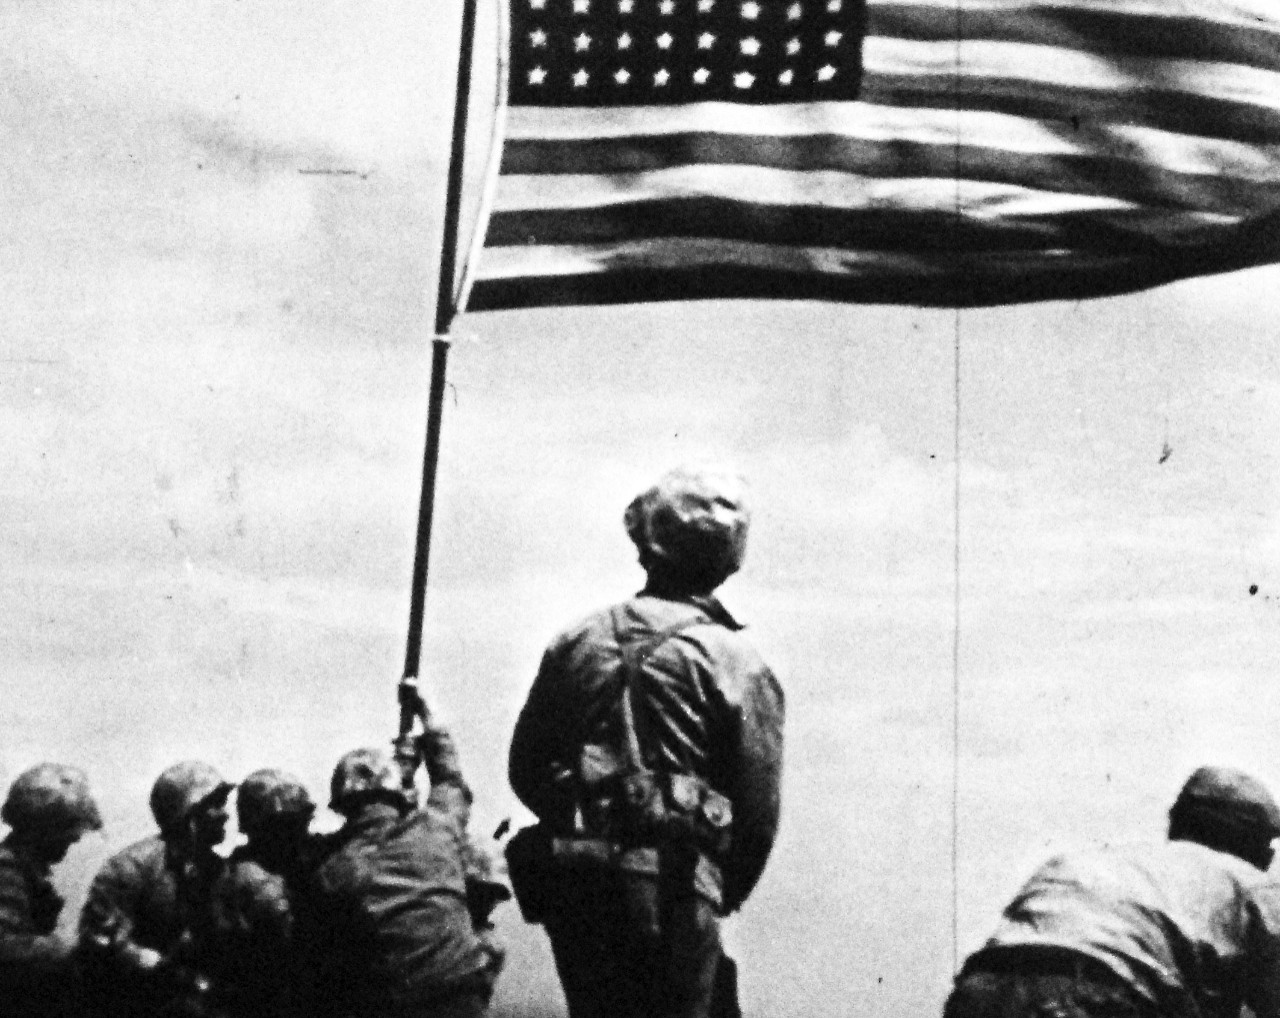 127-GW-319-146246:  Iwo Jima Operations, February 1945.  Iwo Jima Flag Raising on Mt. Suribachi.  Photographed by Dick, copied on October 3, 1946.     Official U.S. Marine Corps Photograph, now in the collections of the National Archives.  (2016/09/06).